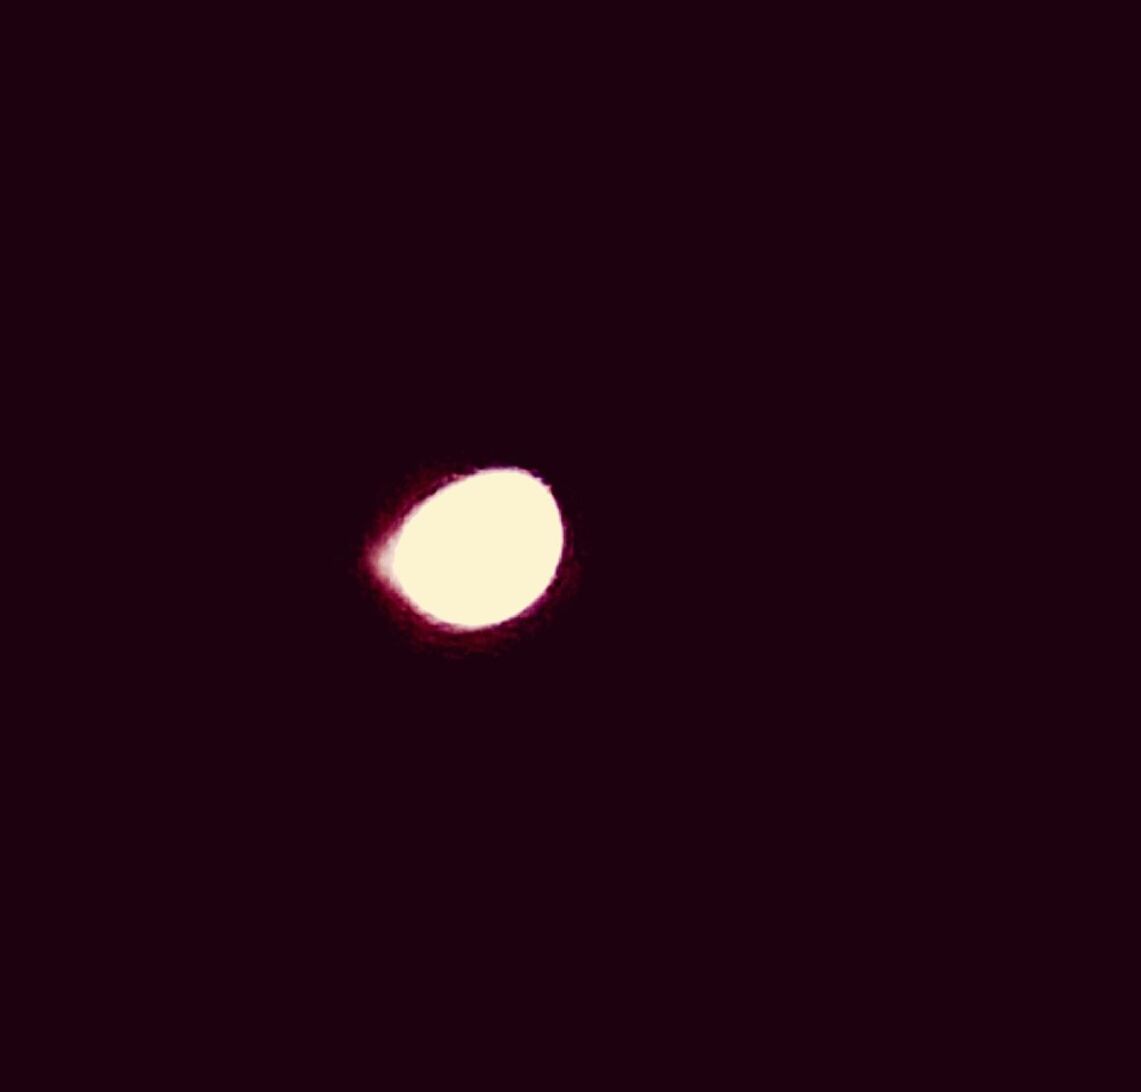 VIEW OF MOON IN THE DARK